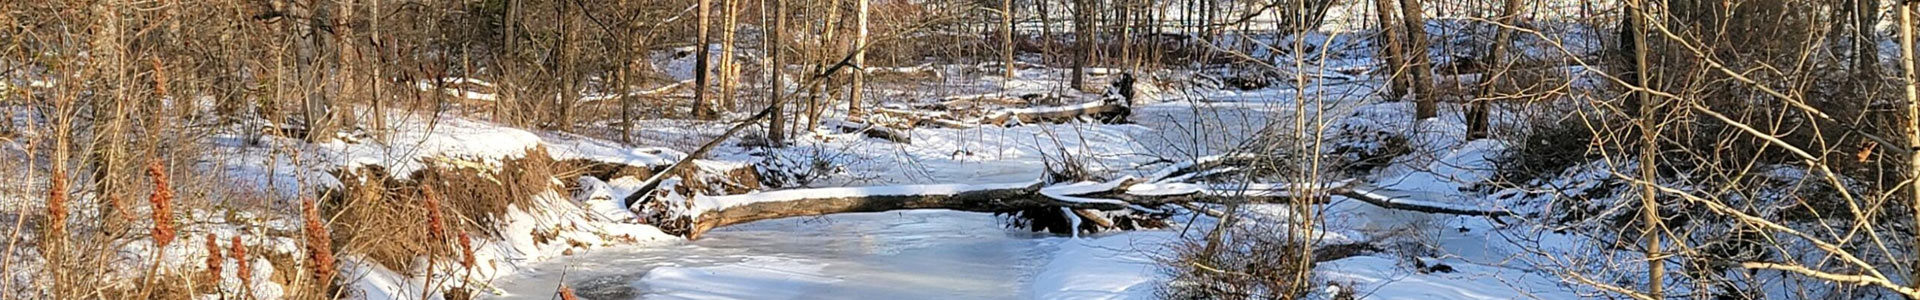 downed tree across a stream in the winter with snow on the ground